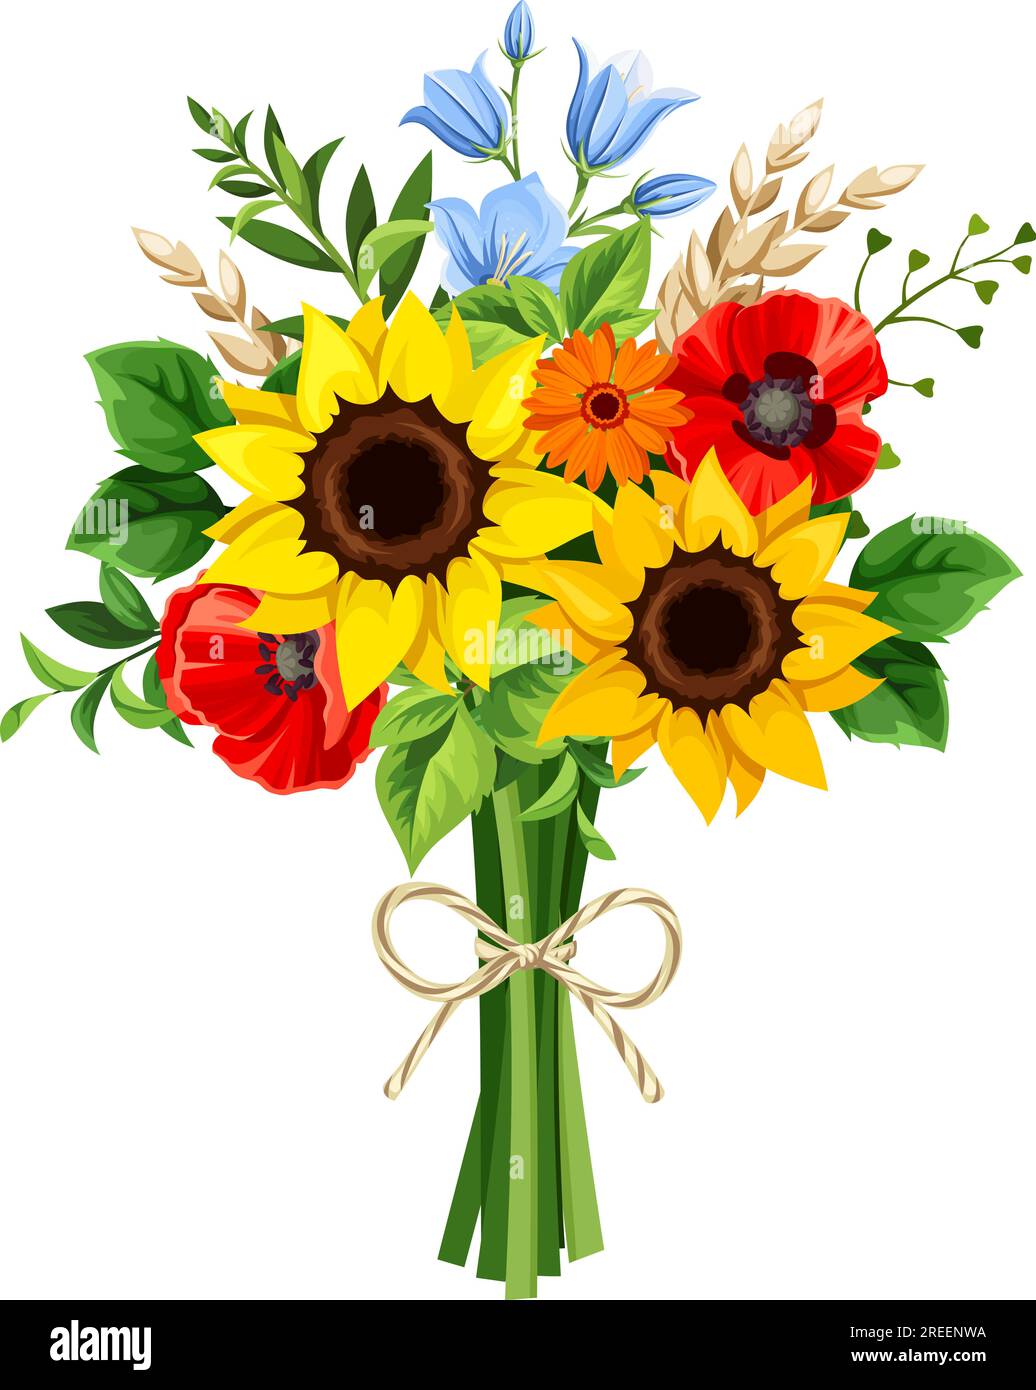 Bouquet of sunflowers, poppy flowers, and bluebell flowers isolated on a white background. Vector illustration Stock Vector